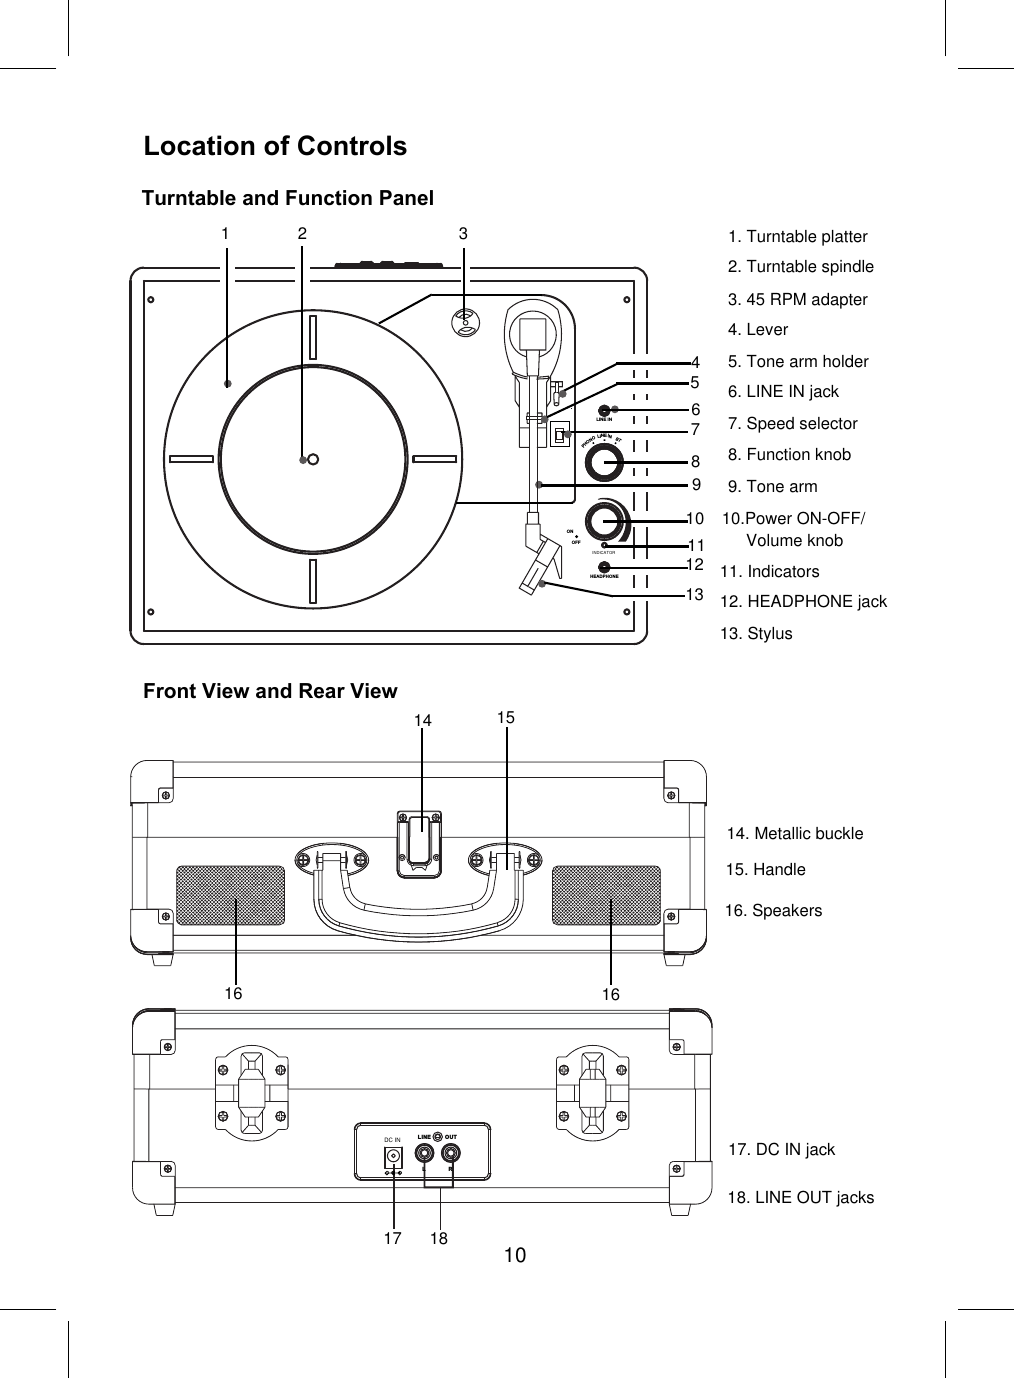 Front View and Rear ViewTurntable and Function PanelLocation of ControlsEN IINL       BO TNOHP LIN E INHEA DP HON EONOFF1 2 3456789101112131. Turntable platter2. Turntable spindle3. 45 RPM adapter 4. Lever5. Tone arm holder6. LINE IN jack7. Speed selector8. Function knob9. Tone arm11. Indicators12. HEADPHONE jack13. Stylus14 15161716LINE O UTRL1817. DC IN jack18. LINE OUT jacks14. Metallic buckle15. Handle16. Speakers10.Power ON-OFF/Volume knobINDICATORDC IN10